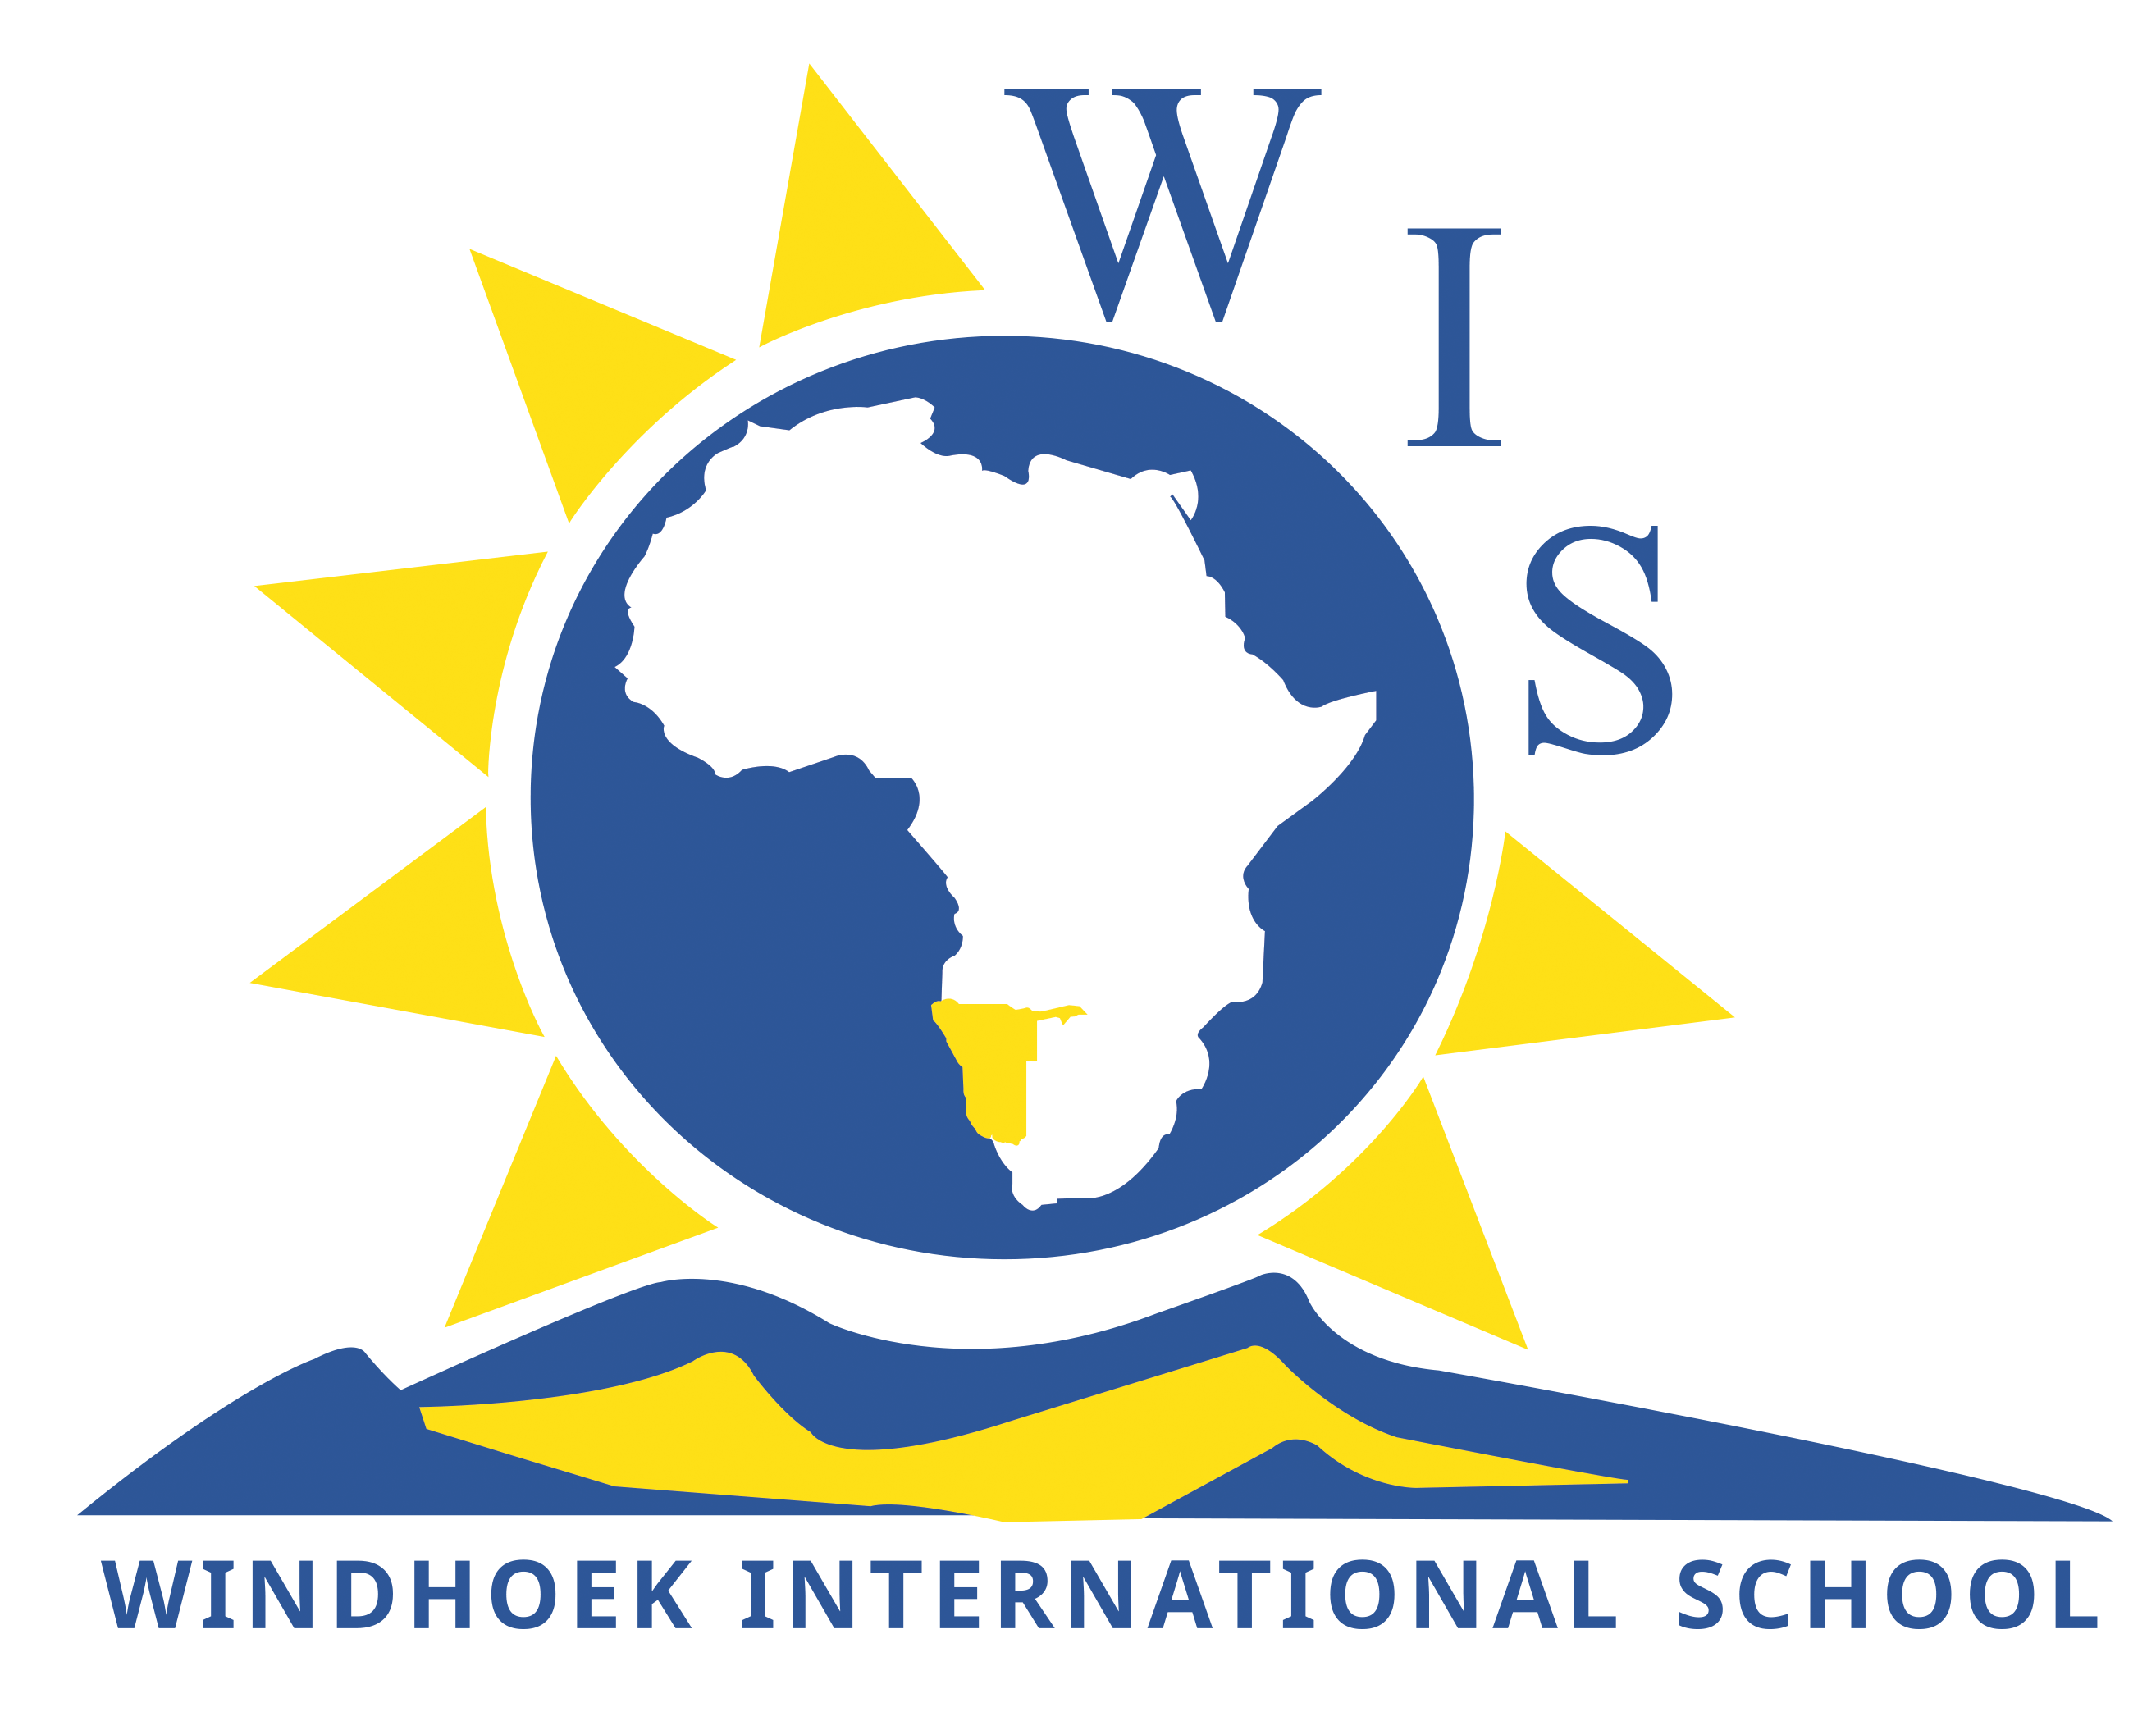 Wis Logo - File:Wis-logo-vector-copy.png - Wikimedia Commons